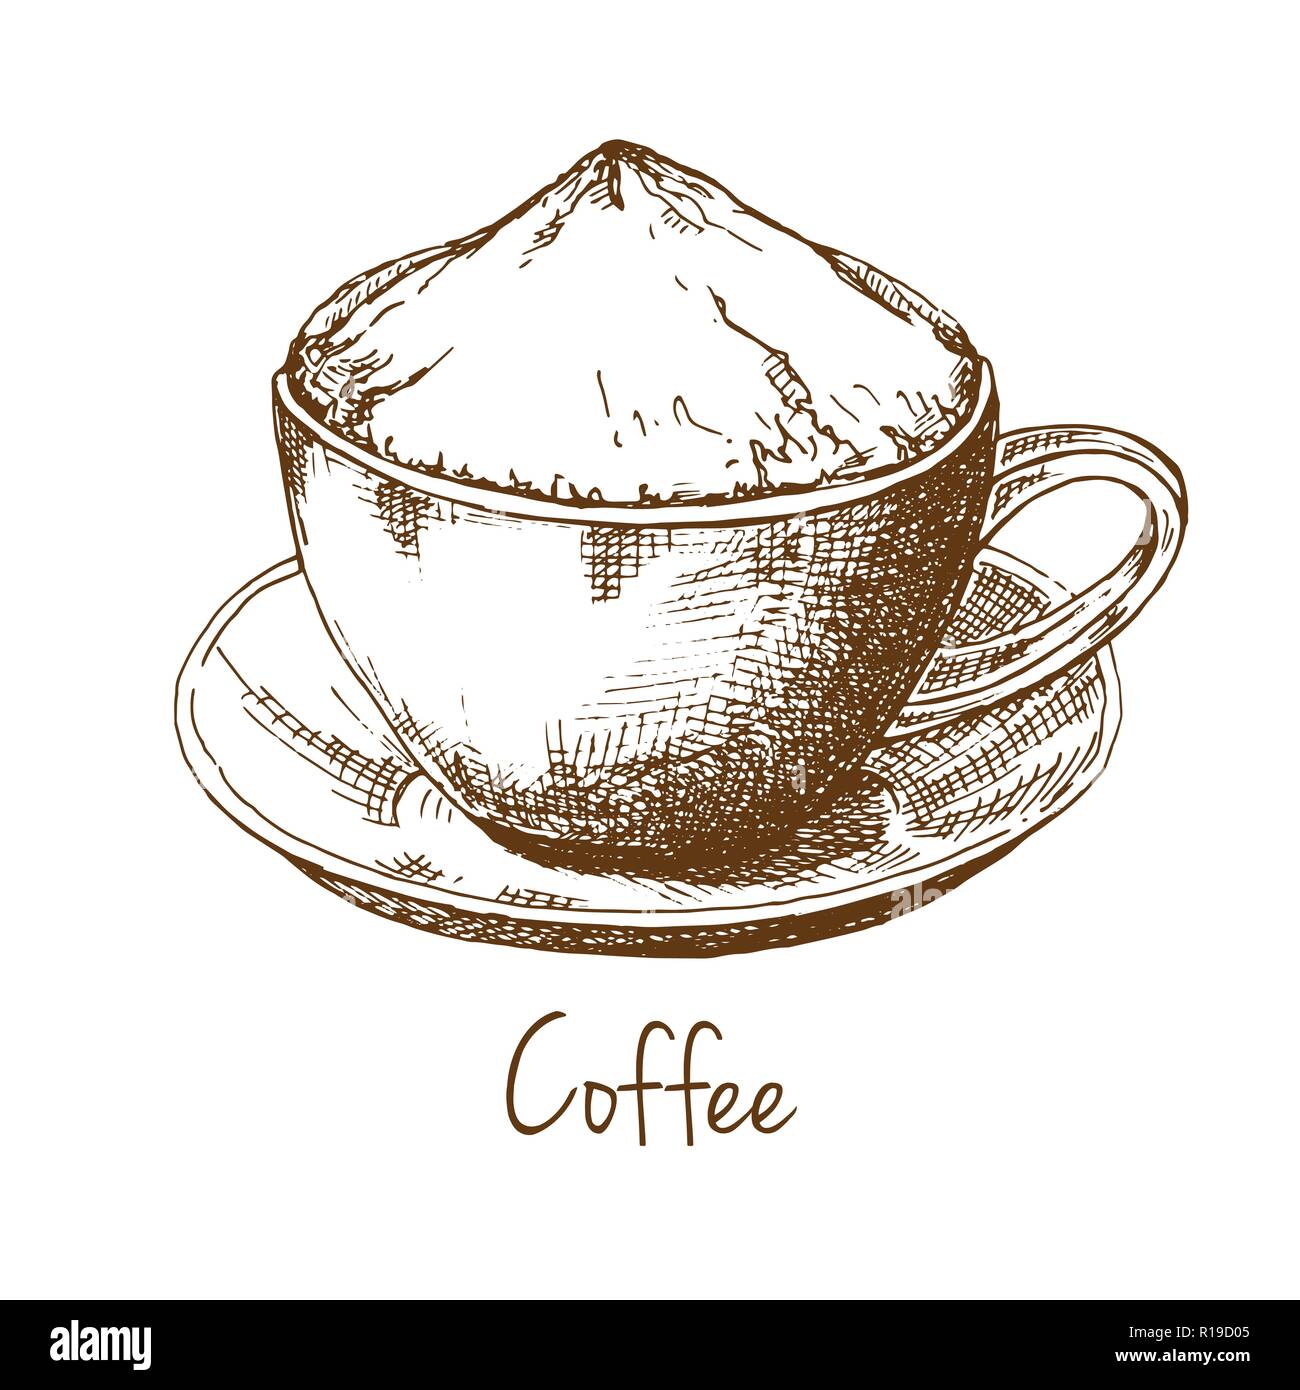 Hand drawn coffee cup vector by iwant61 on VectorStock  Coffee cup drawing  Coffee cup tattoo Coffee cup art